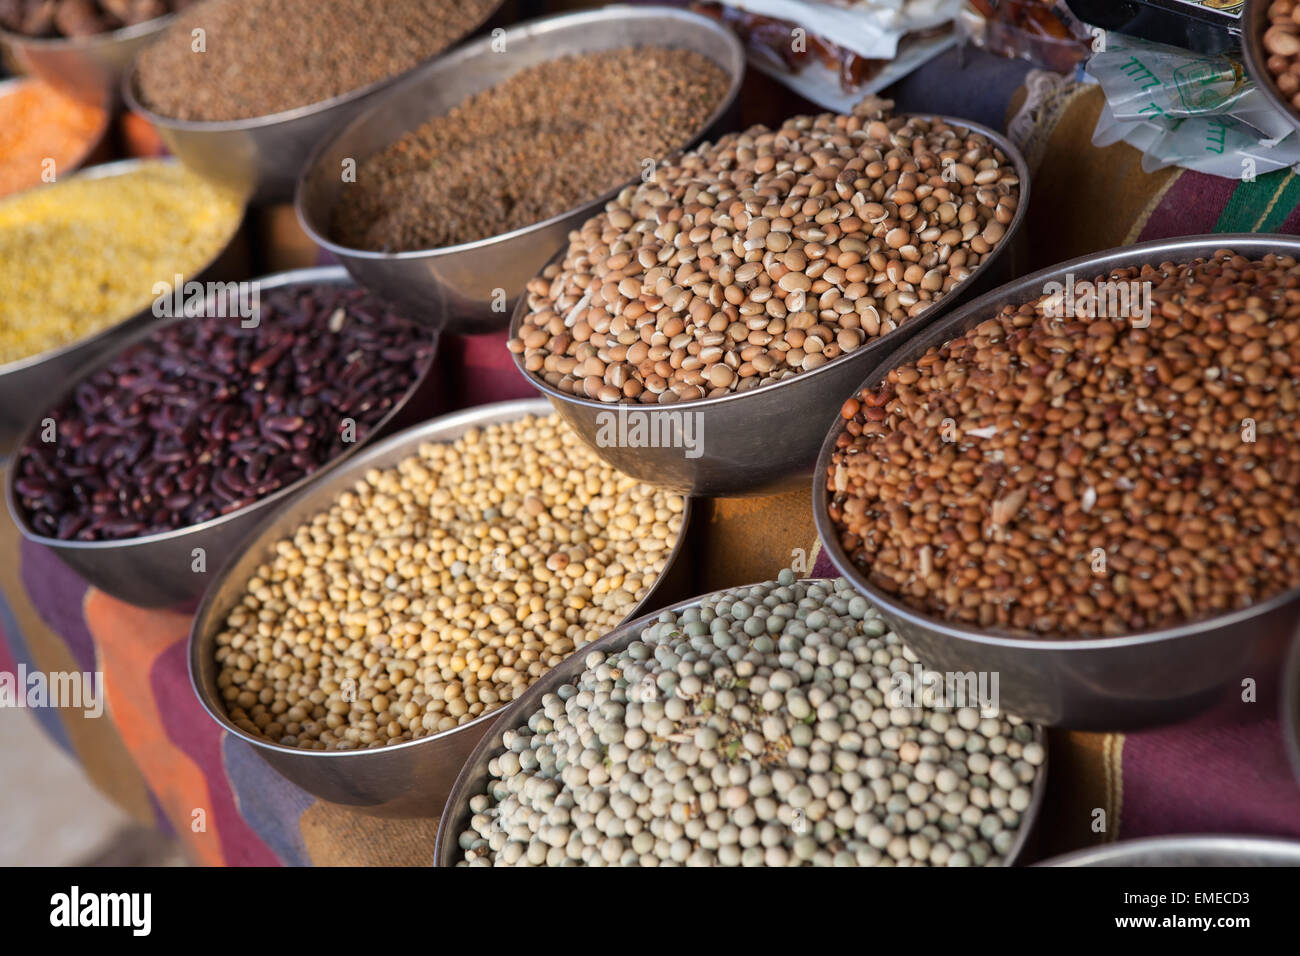 lentils and pulses on display in the market in the old city of Bijapur Stock Photo